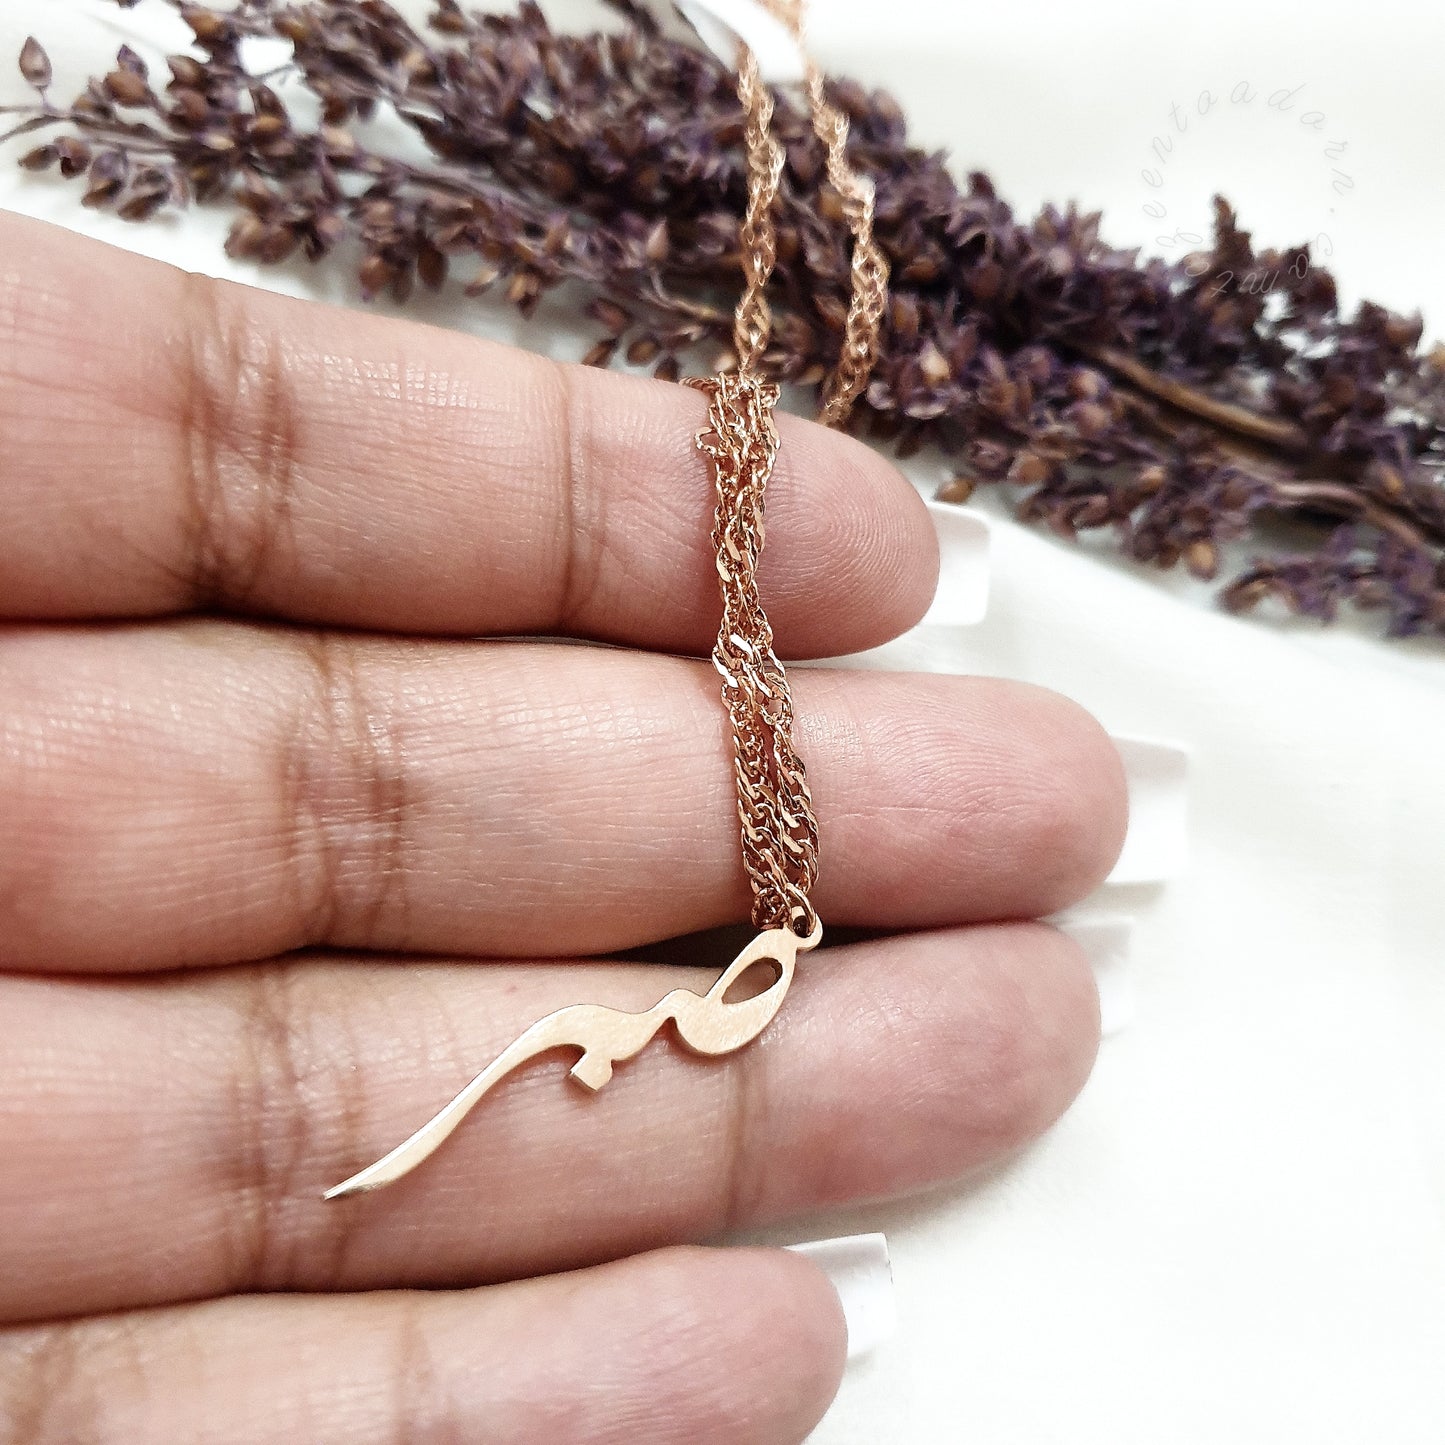 Sabr - صبر - Patience Pendant Necklace - Rose Gold Plated Jewellery Gift - Hope Deen Motivational Inspiring Islamic Jewellery